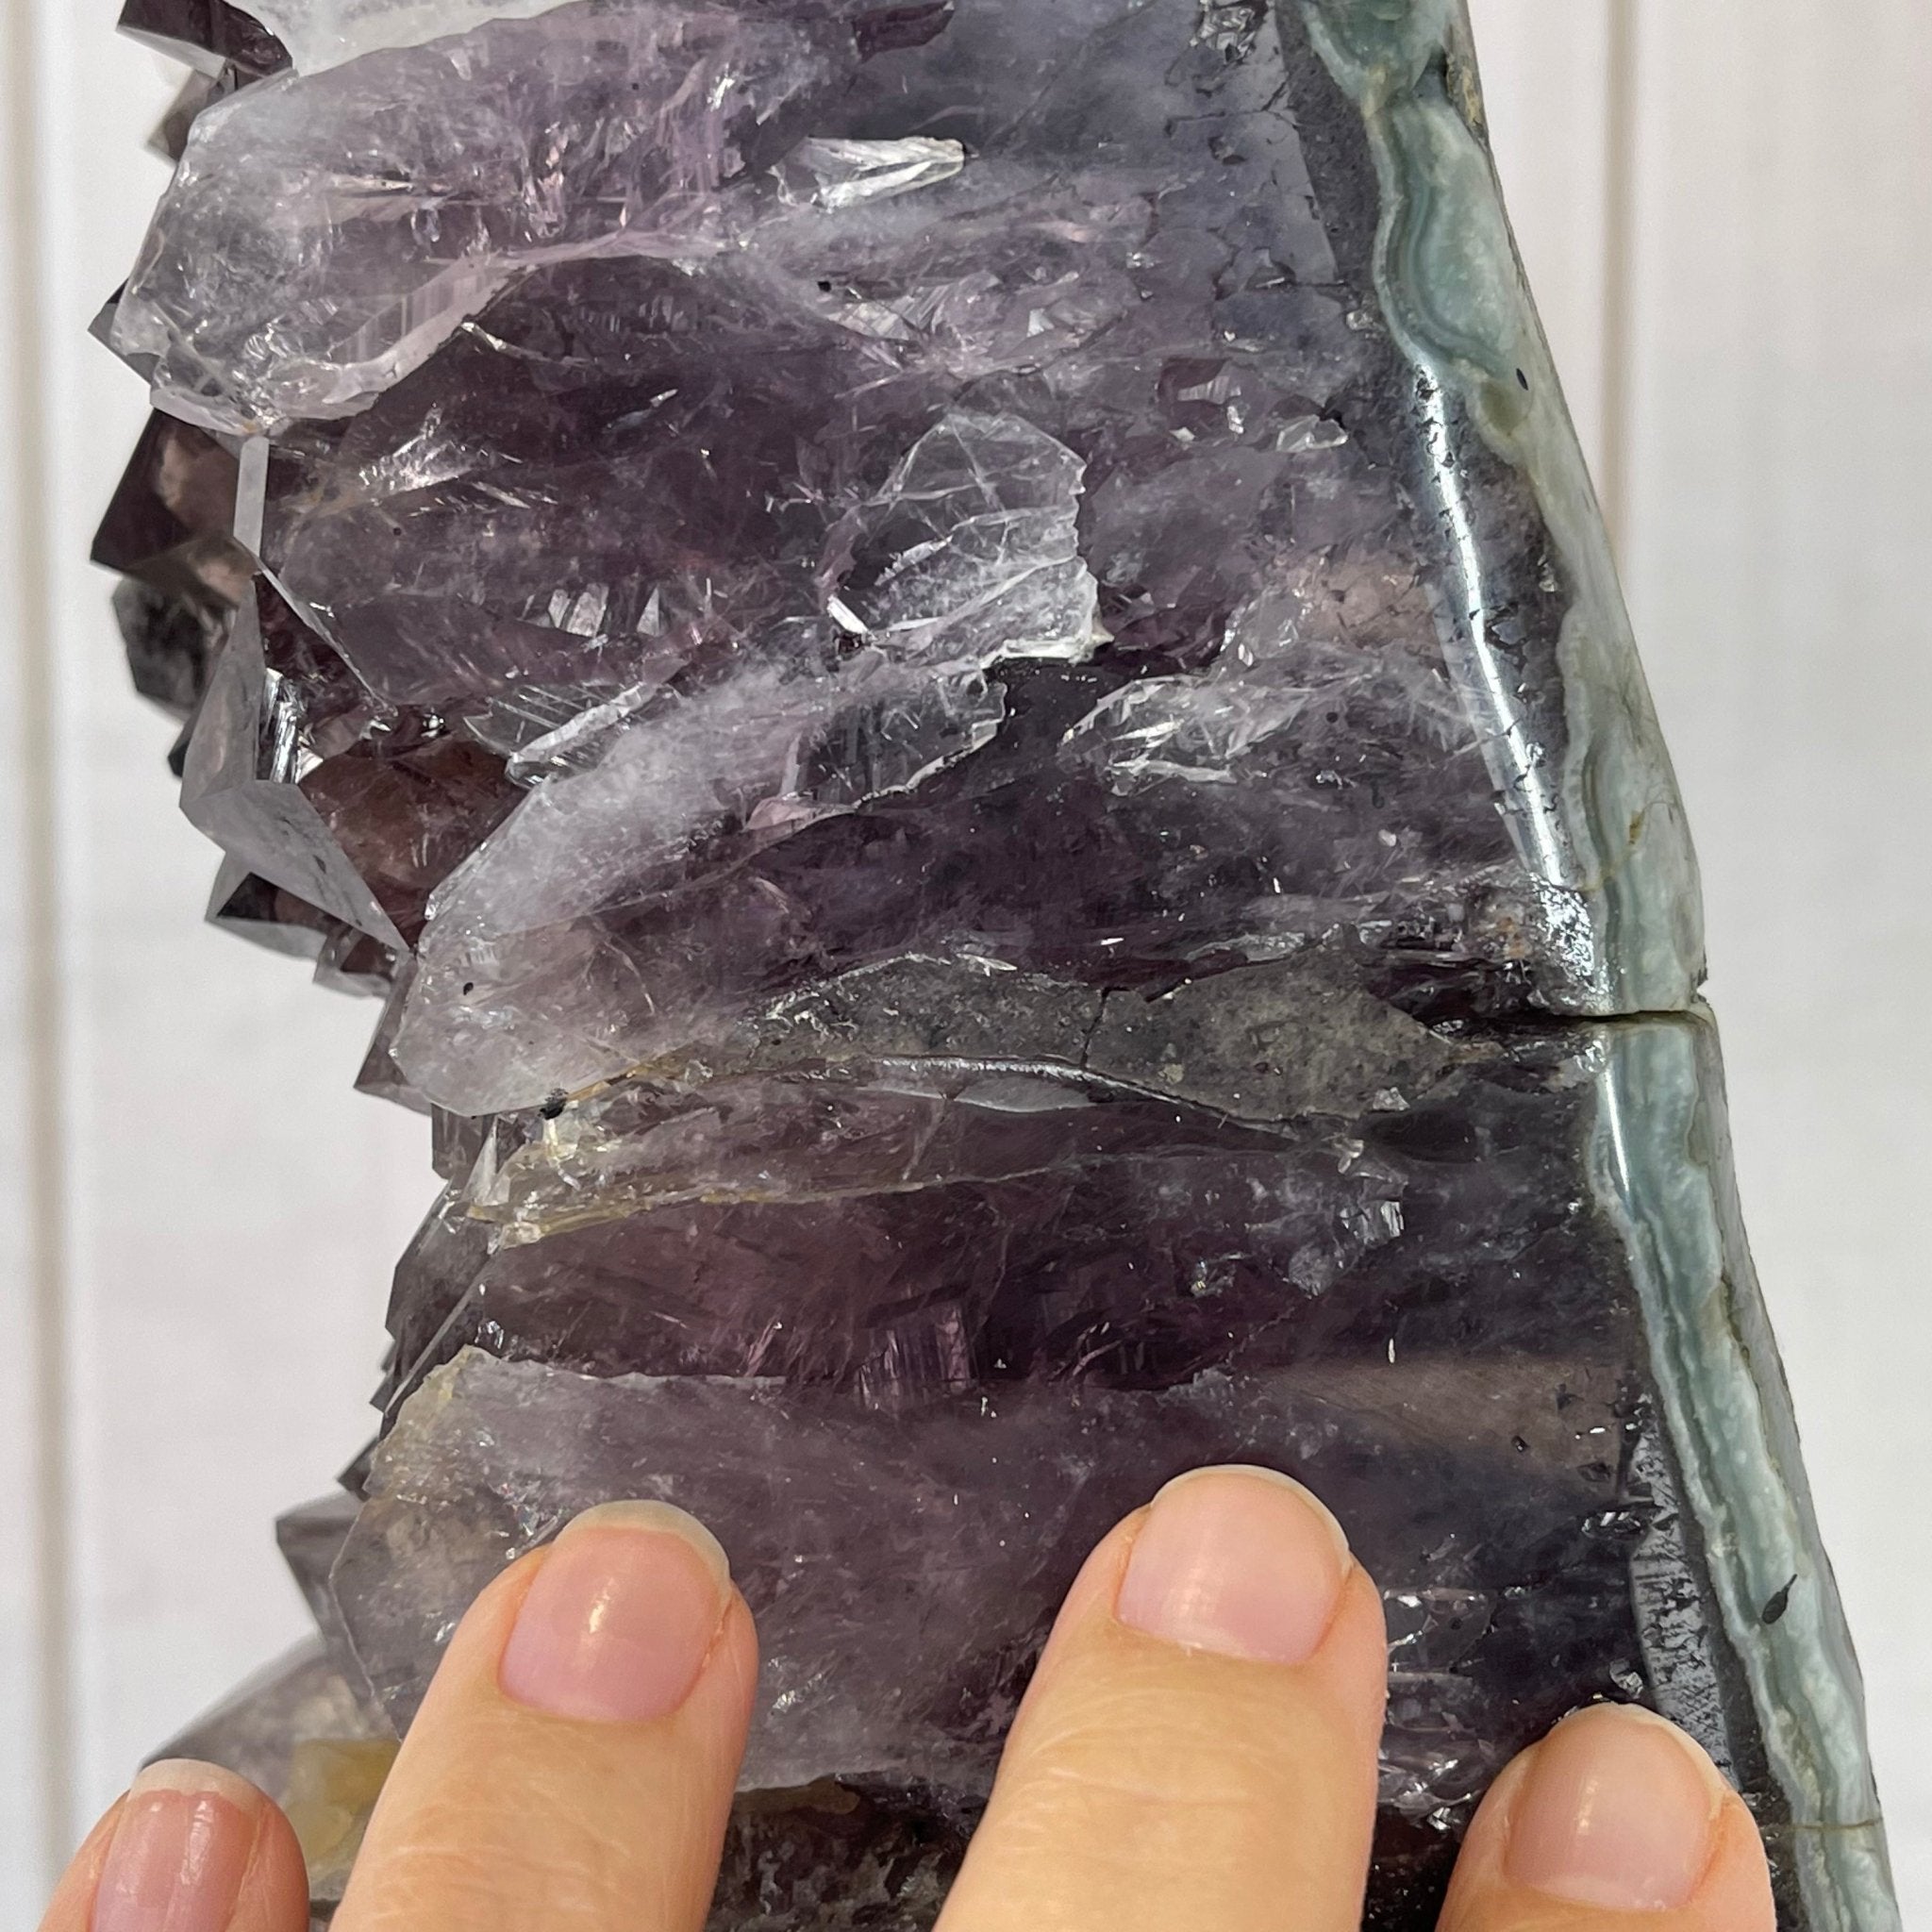 Extra Quality Brazilian Amethyst Crystal Portal on a Tall Rotating Stand, 81.6 lbs & 70" tall Model #5604-0104 by Brazil Gems - Brazil GemsBrazil GemsExtra Quality Brazilian Amethyst Crystal Portal on a Tall Rotating Stand, 81.6 lbs & 70" tall Model #5604-0104 by Brazil GemsPortals on Rotating Bases5604-0104